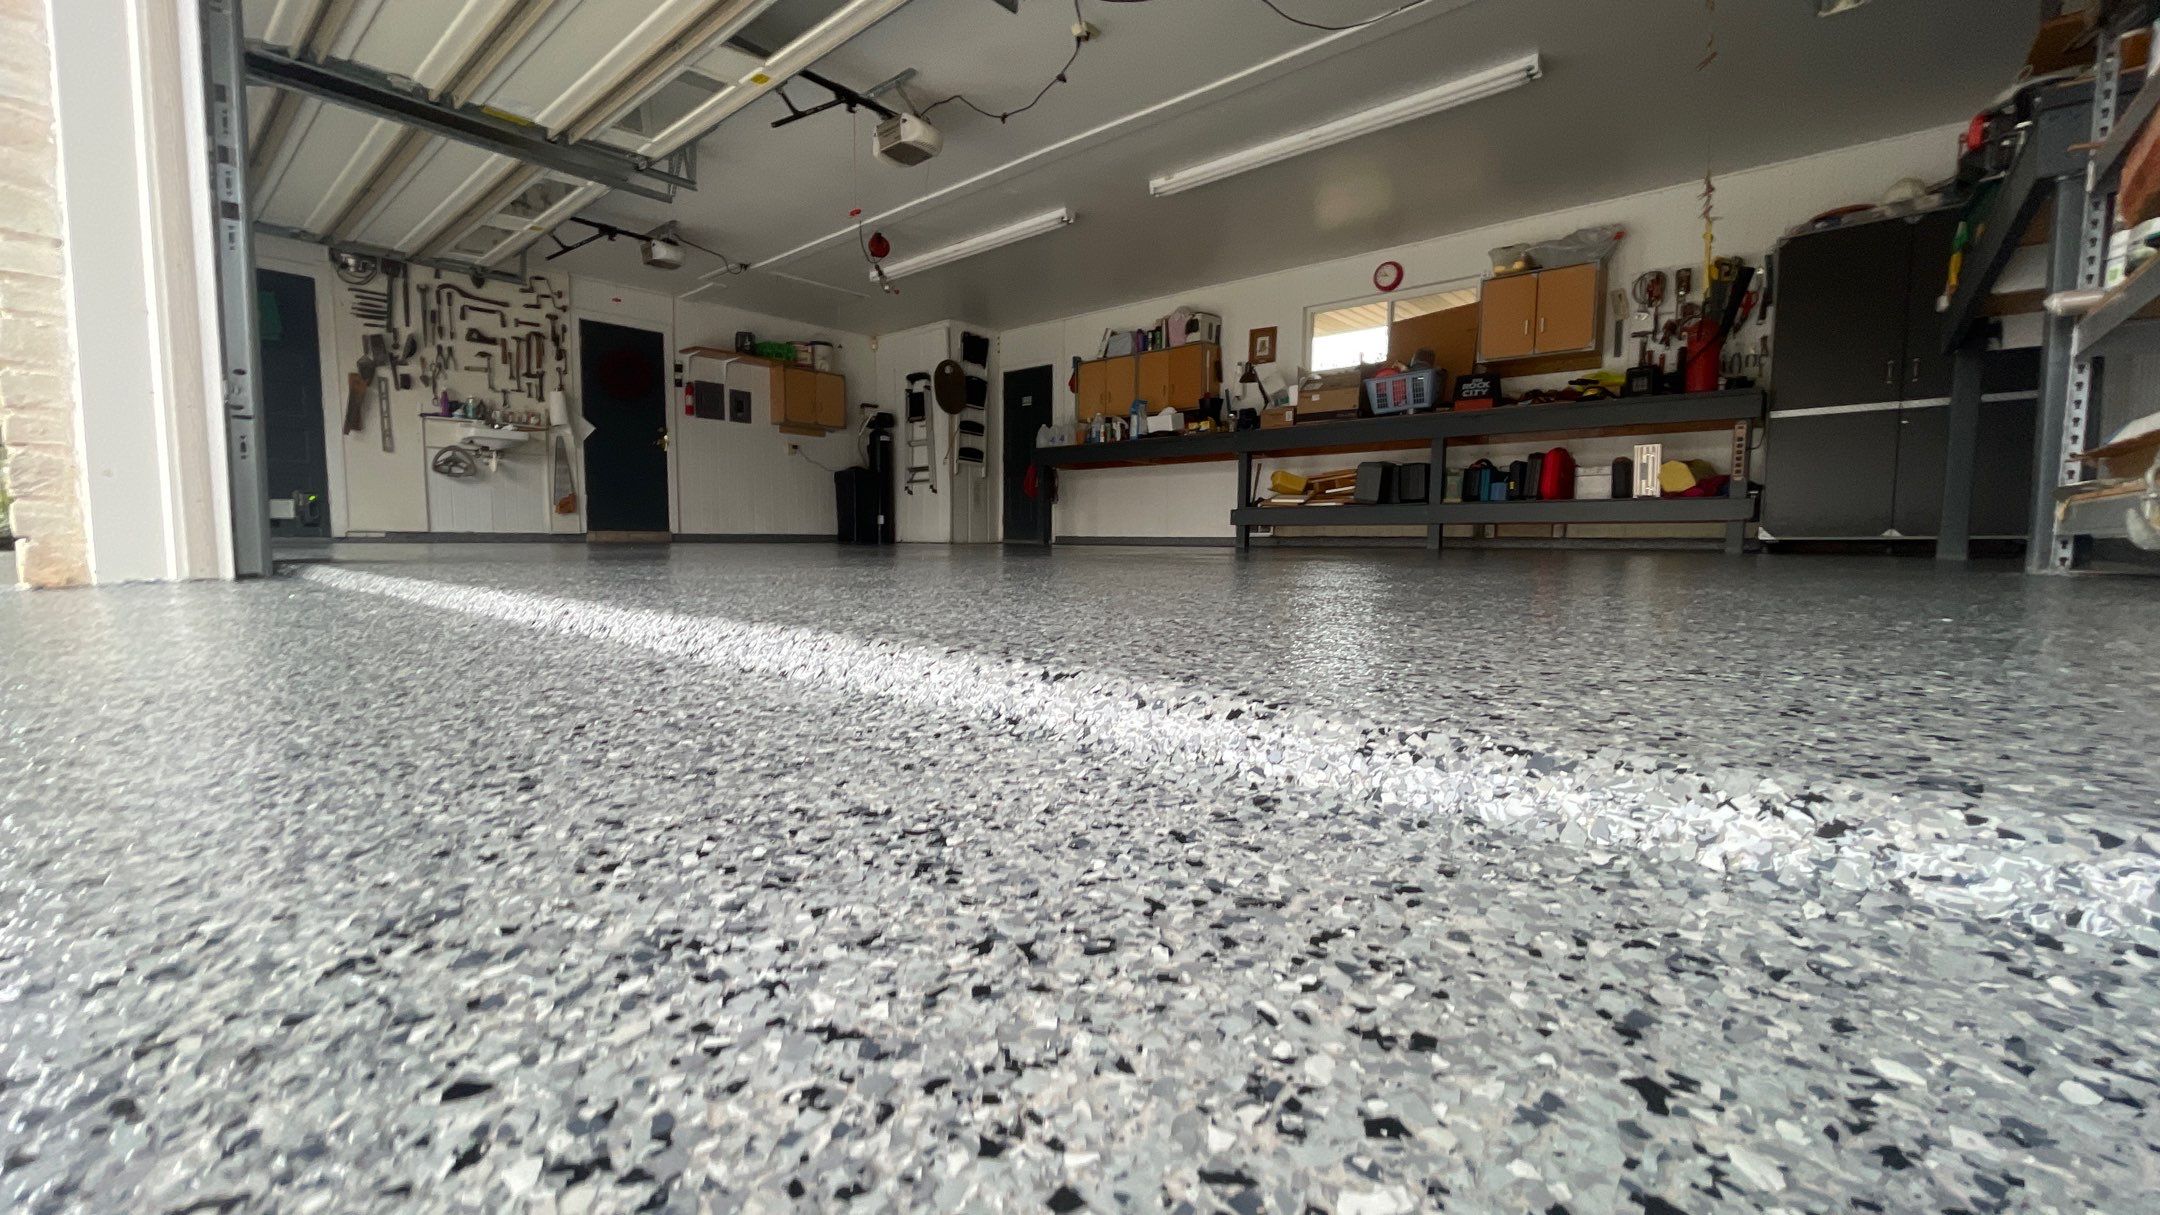 Top 5 Questions ANSWERED To Prepare For Your Garage Floor Coating